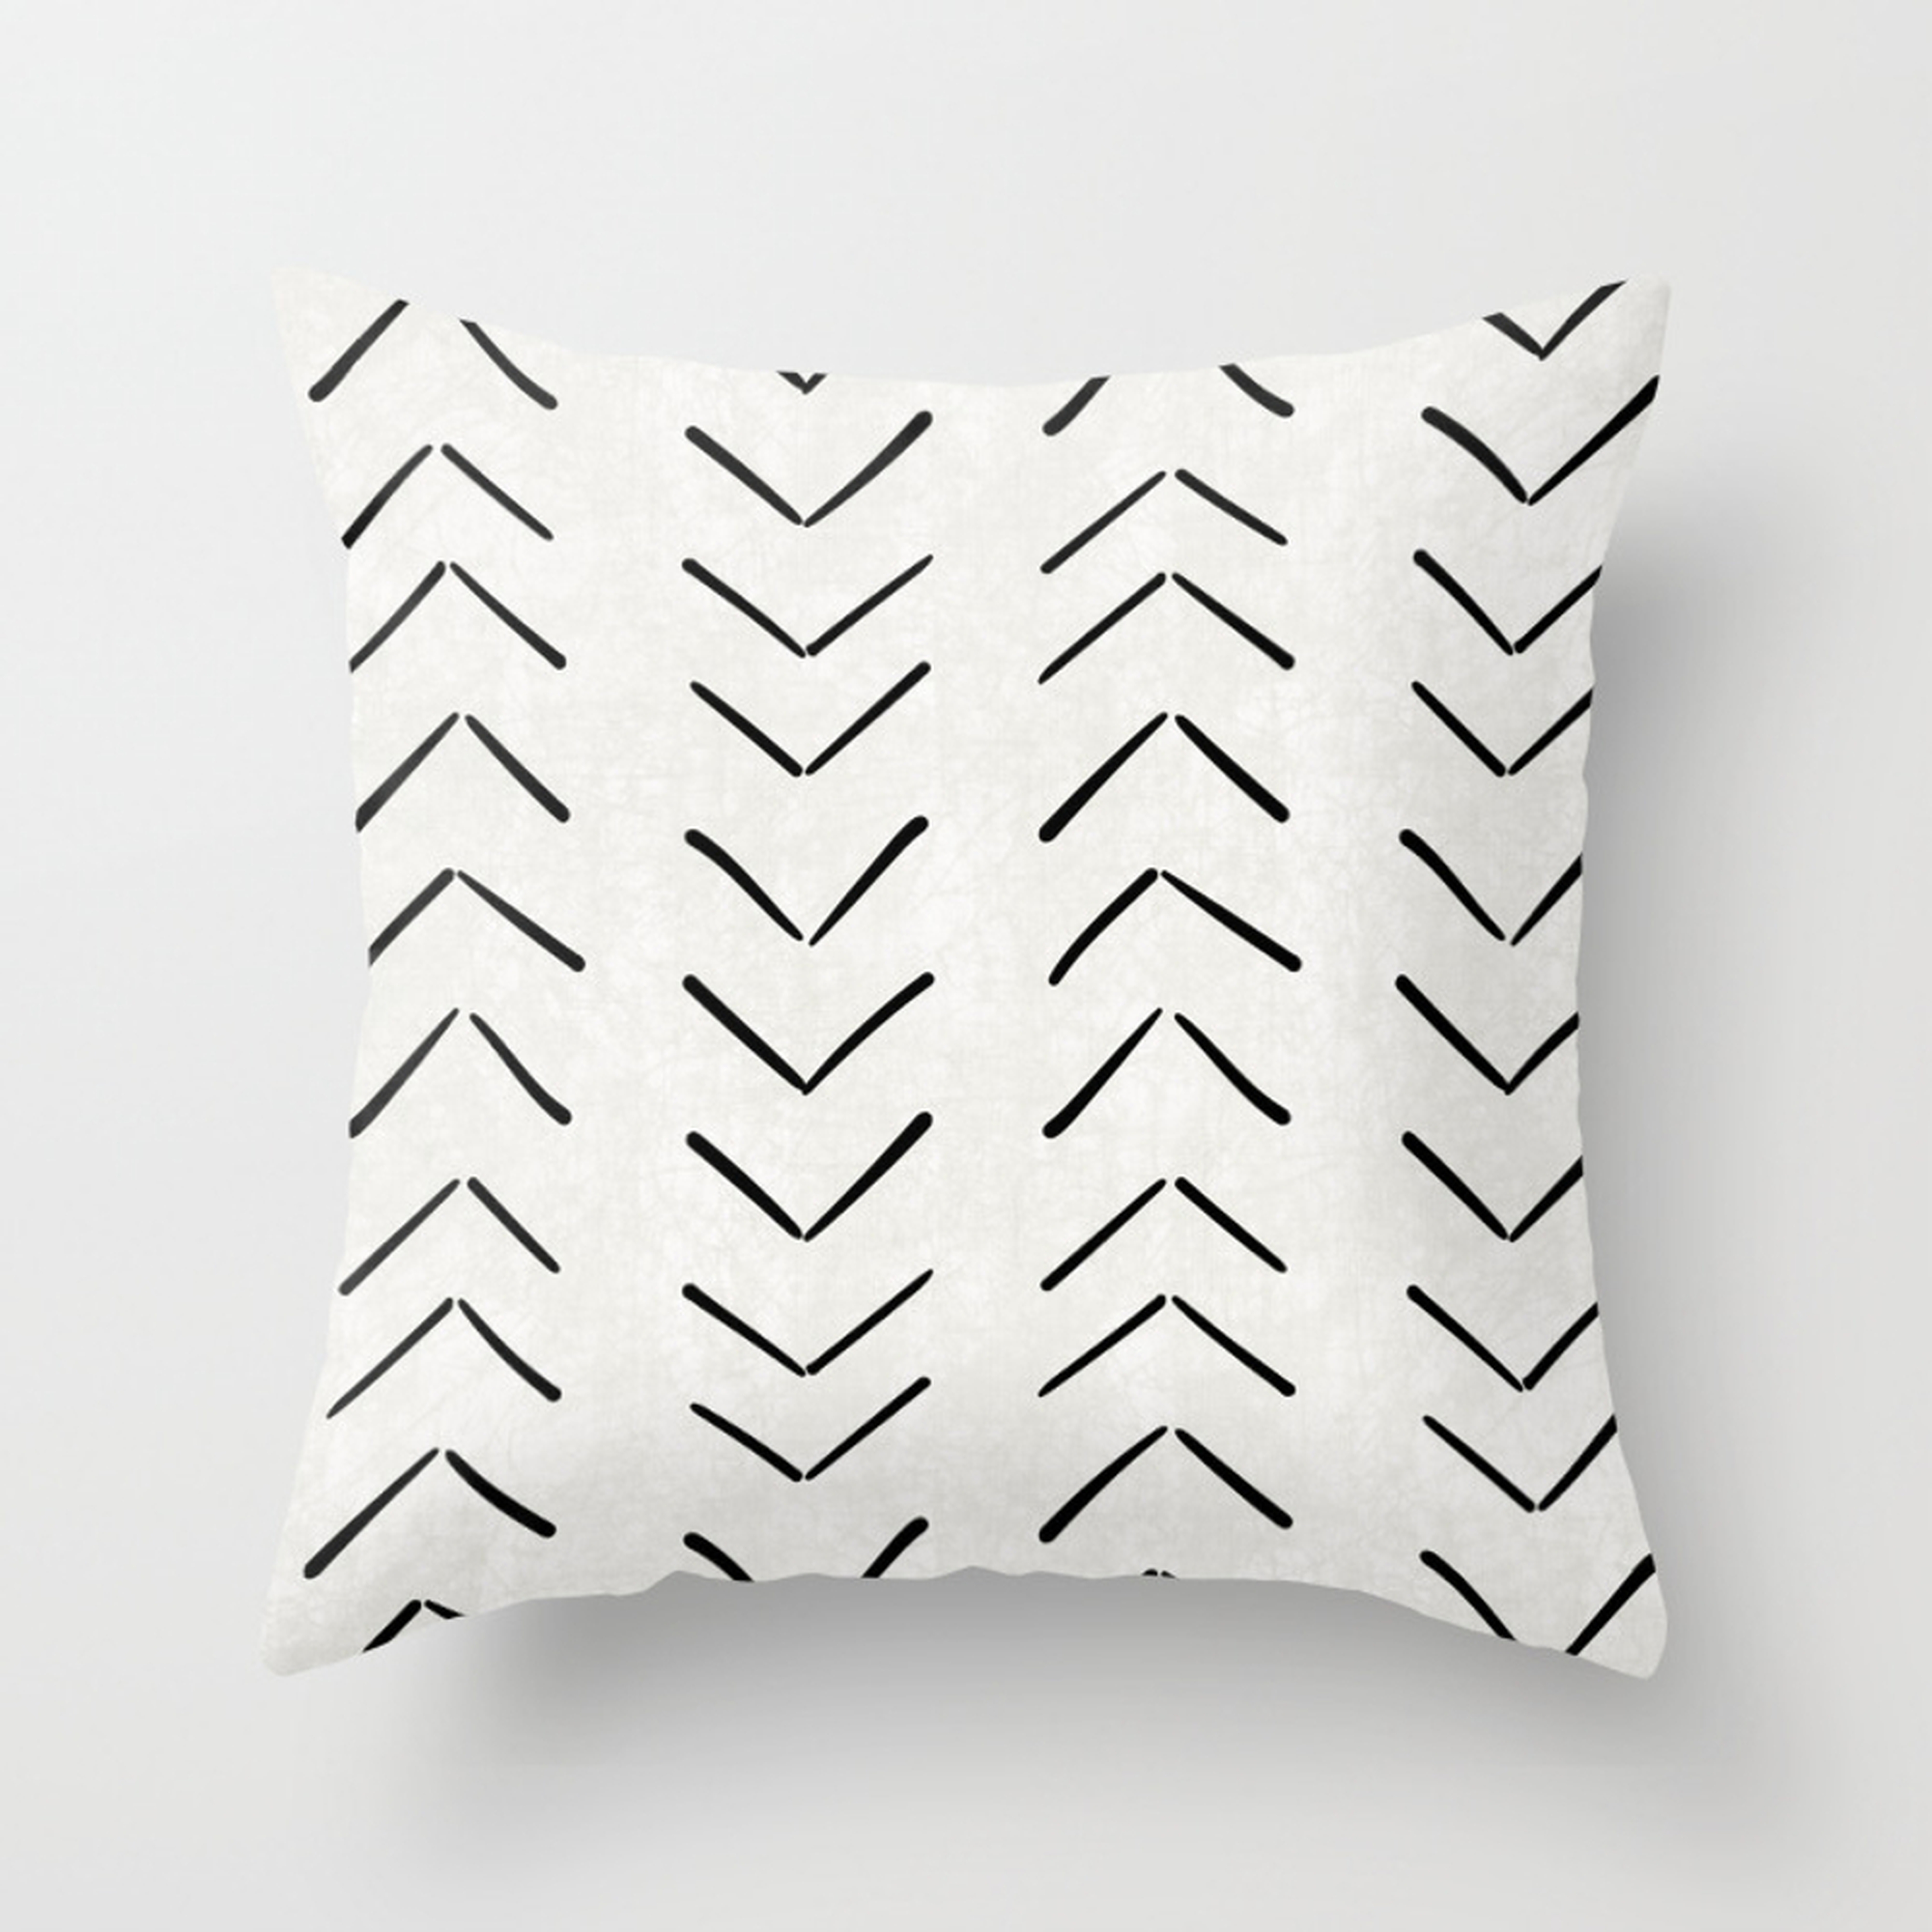 Mud Cloth Big Arrows in Cream Throw Pillow - Indoor Cover (18" x 18") with pillow insert by Beckybailey1 - Society6